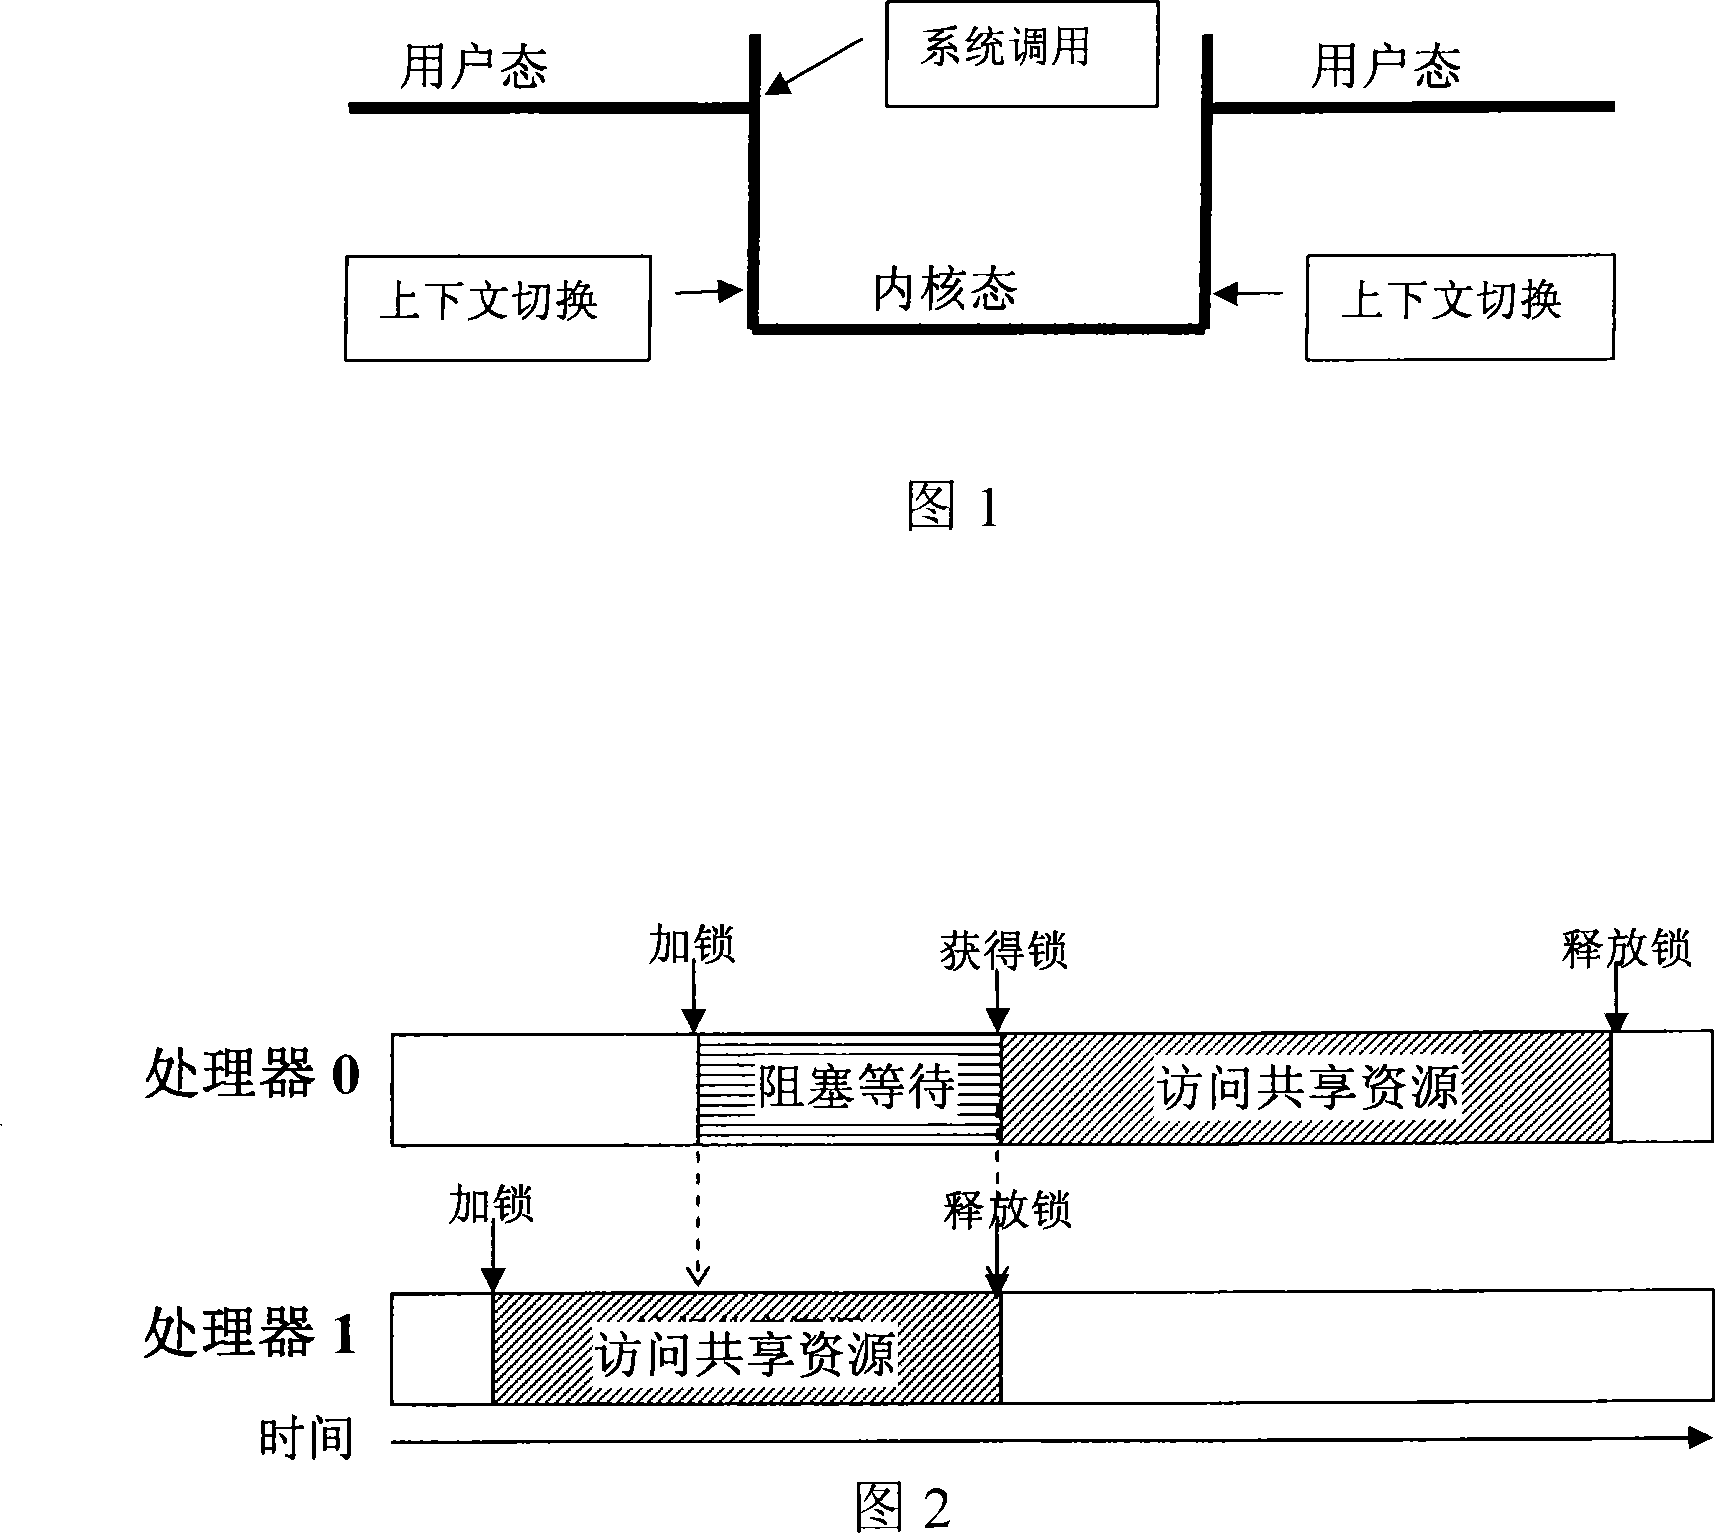 Operating system and operating system management method